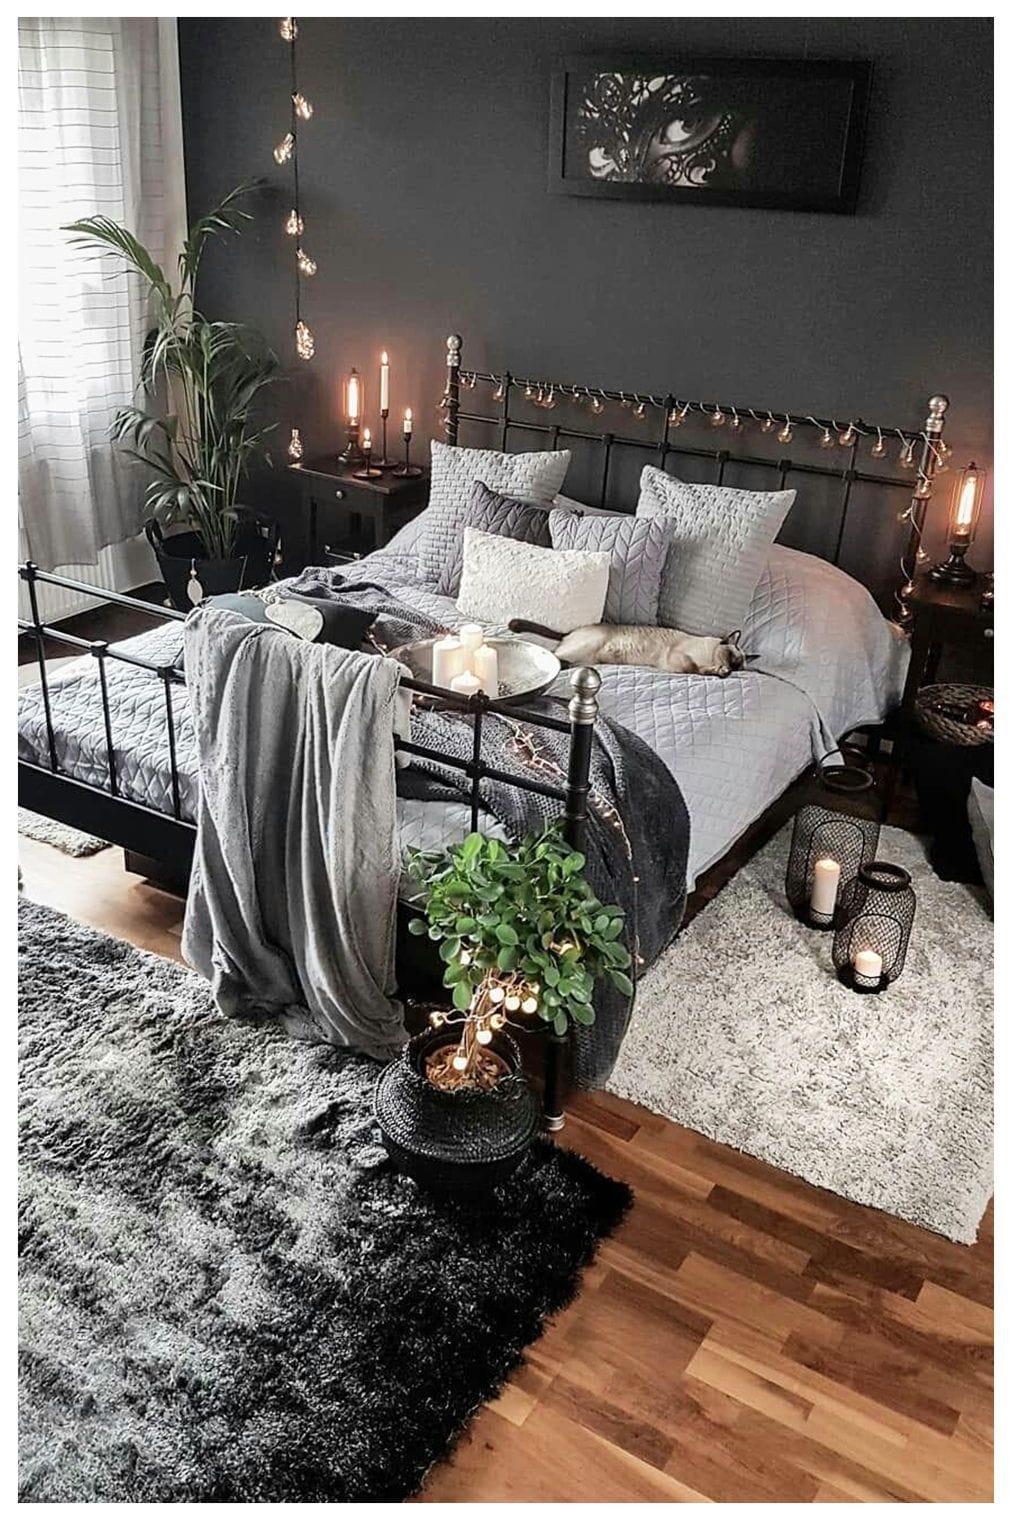 Gothic Bedroom Ideas with Plants